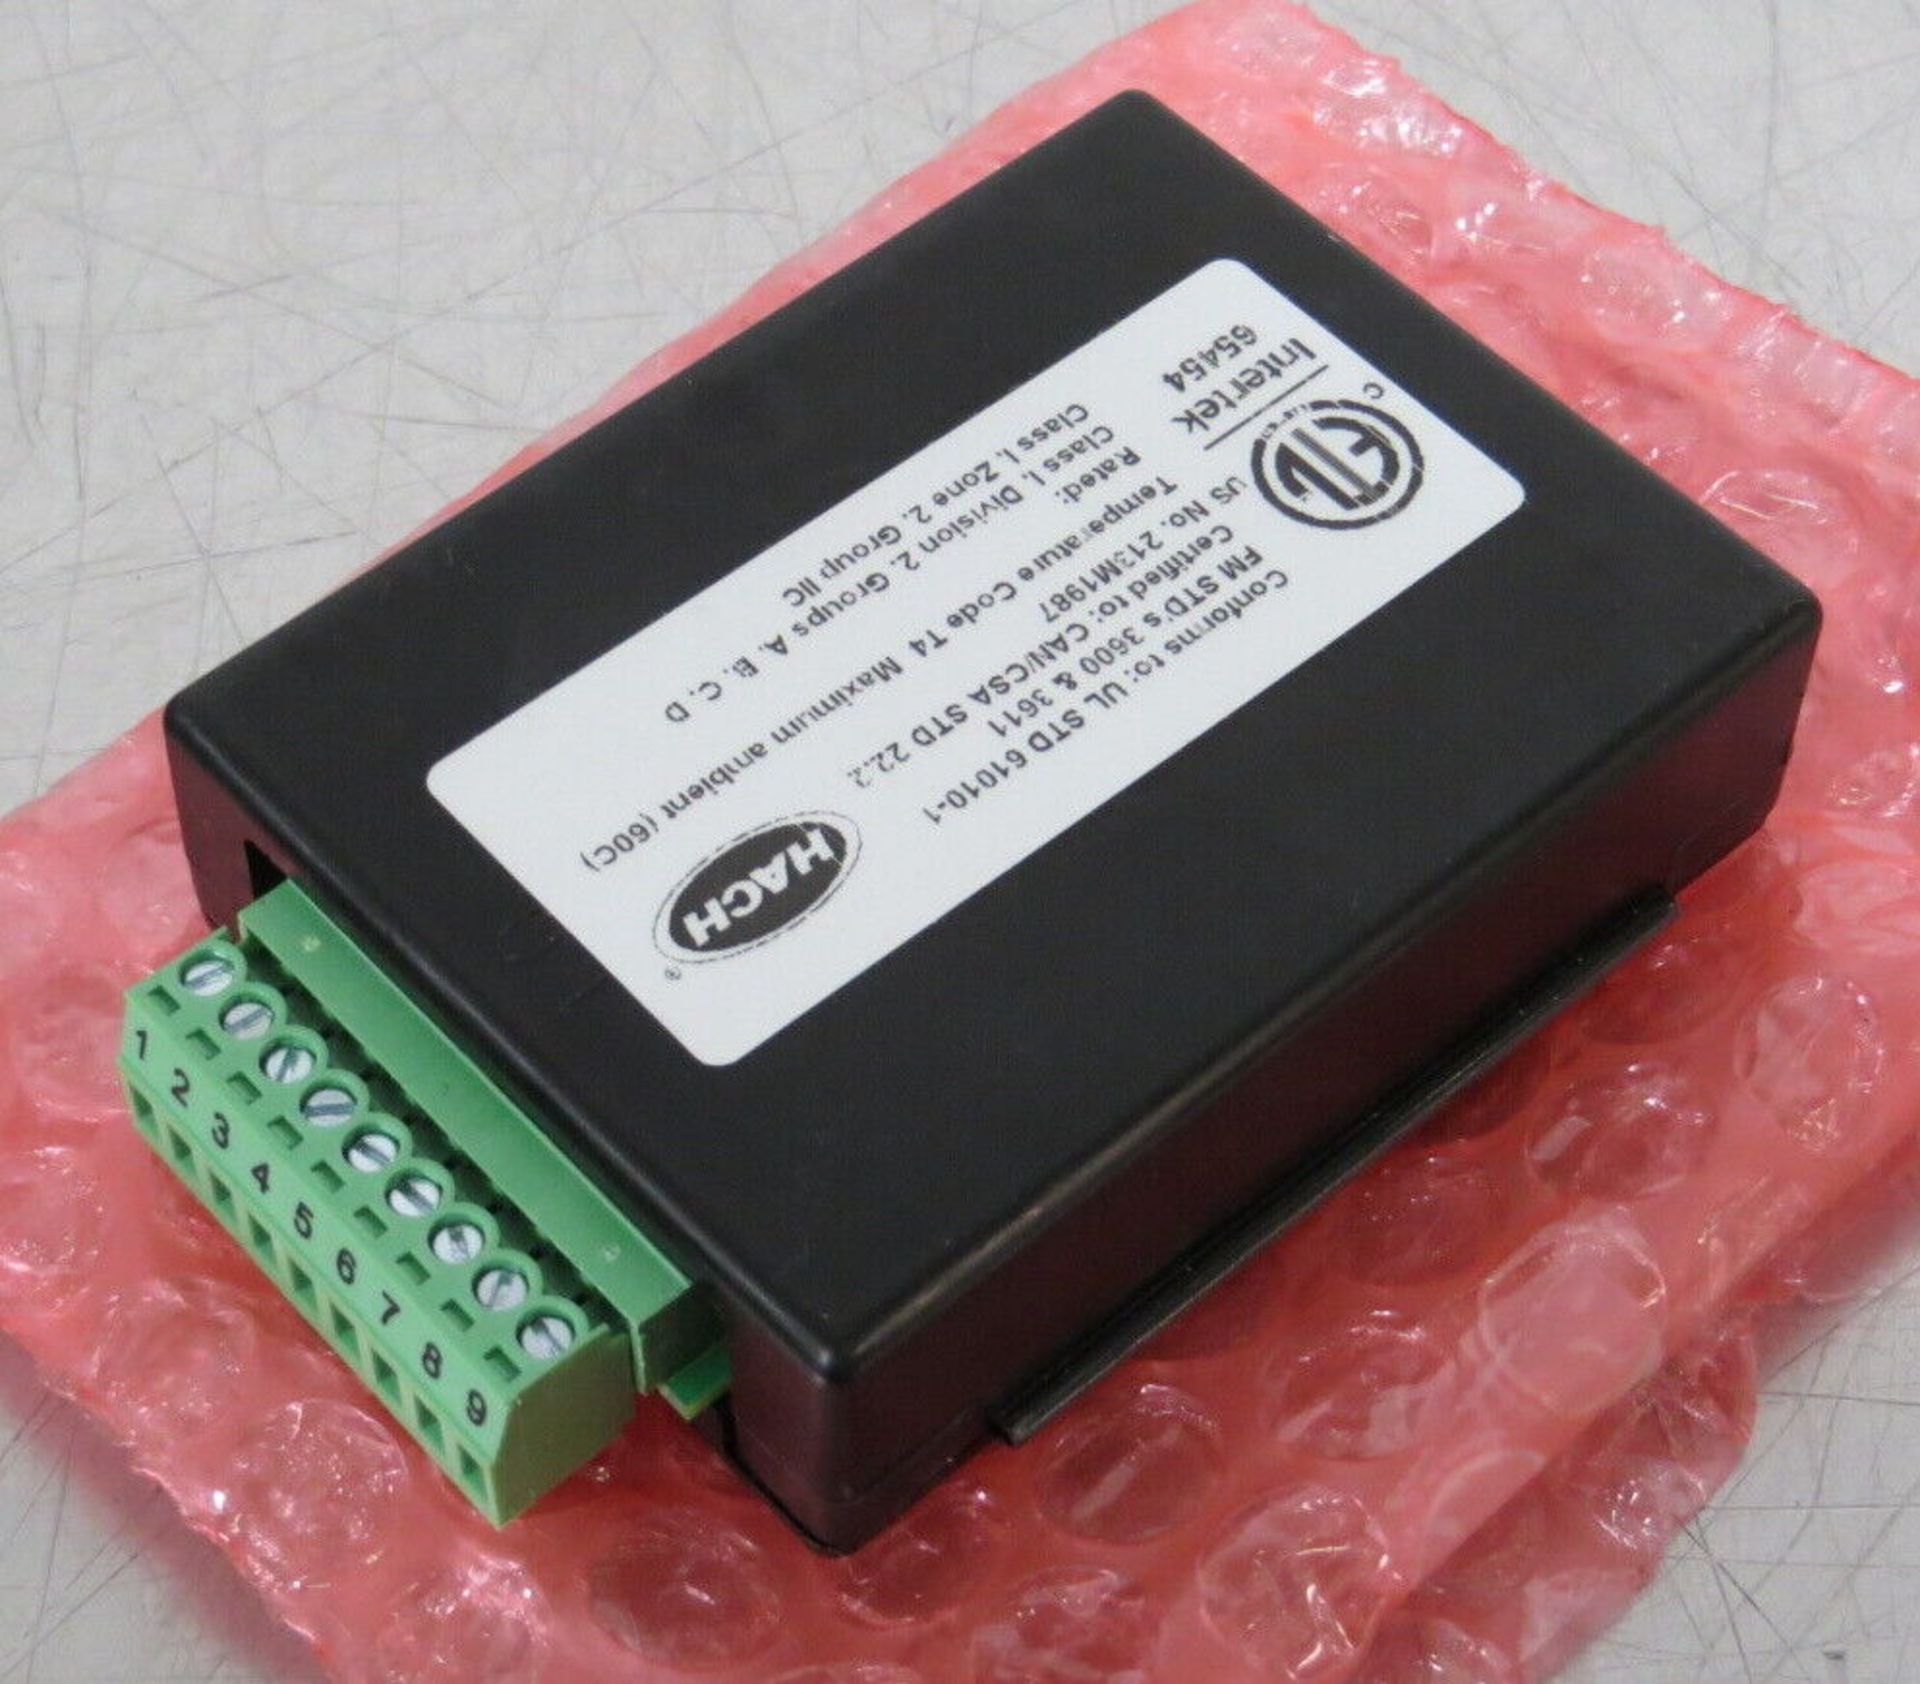 Hach 9334600 4-20mA Output Expansion Module - Gilroy - Image 3 of 6